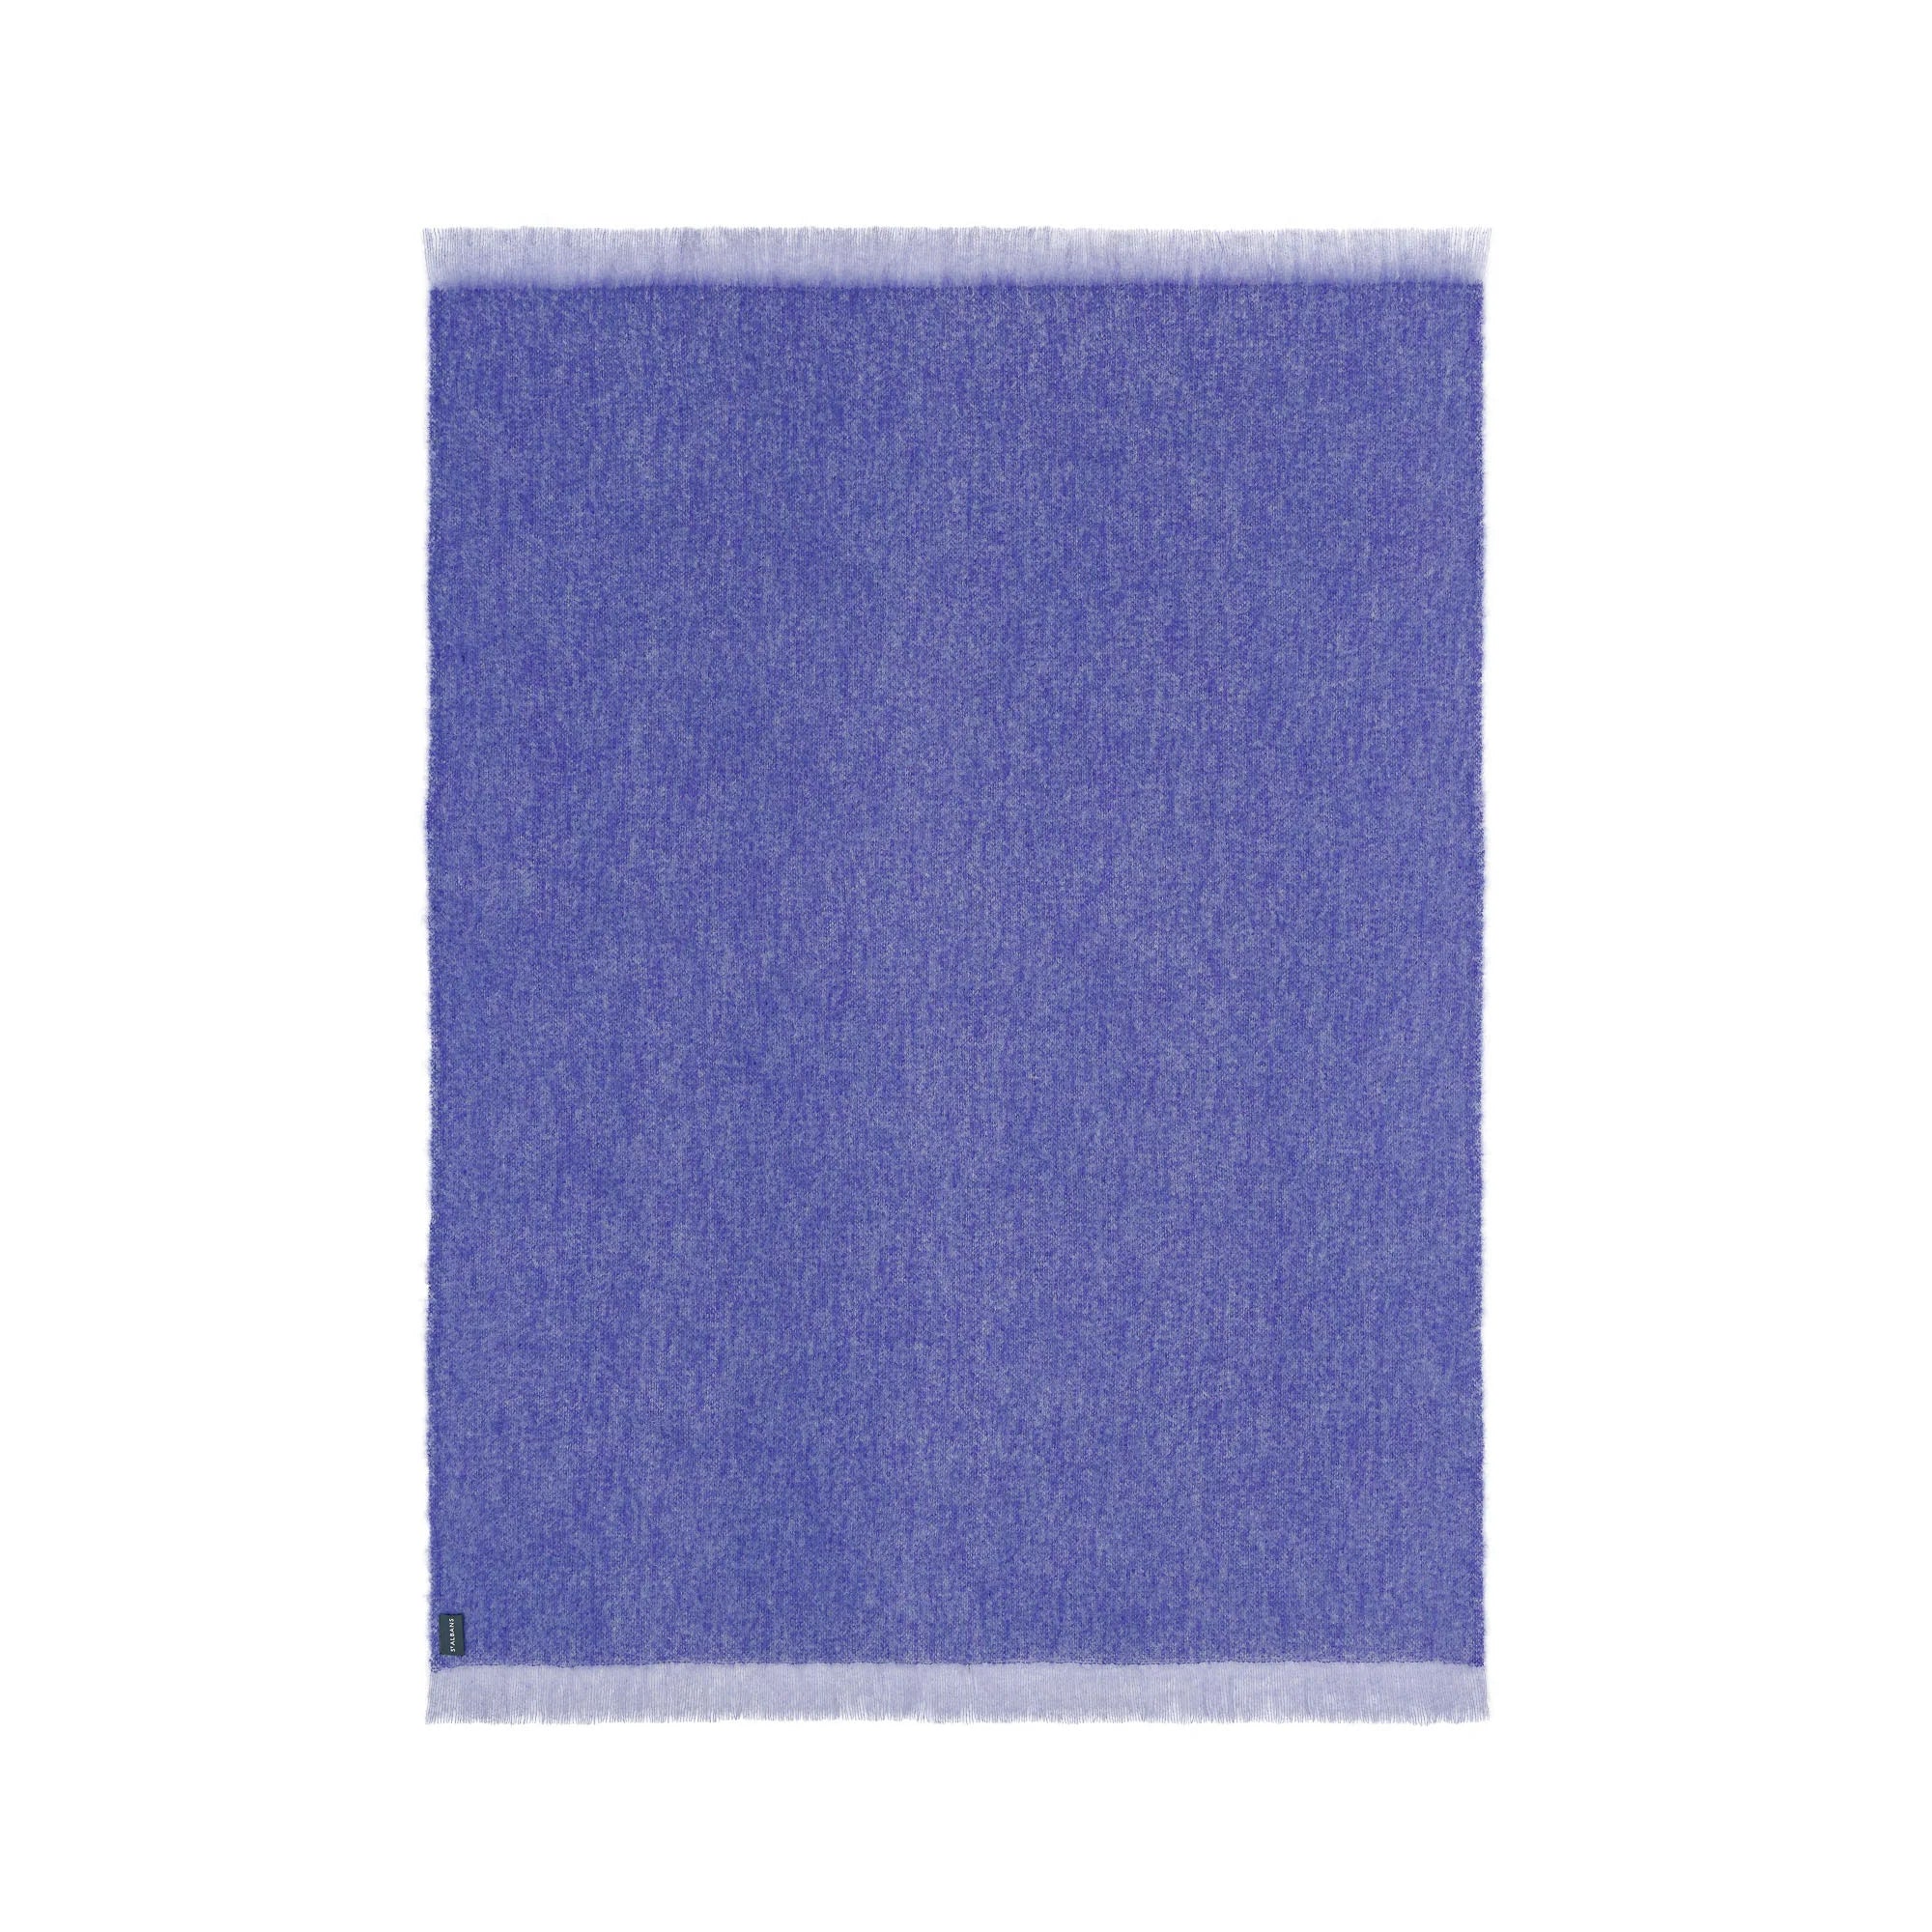 St Albans  - Mohair Periwinkle Throw